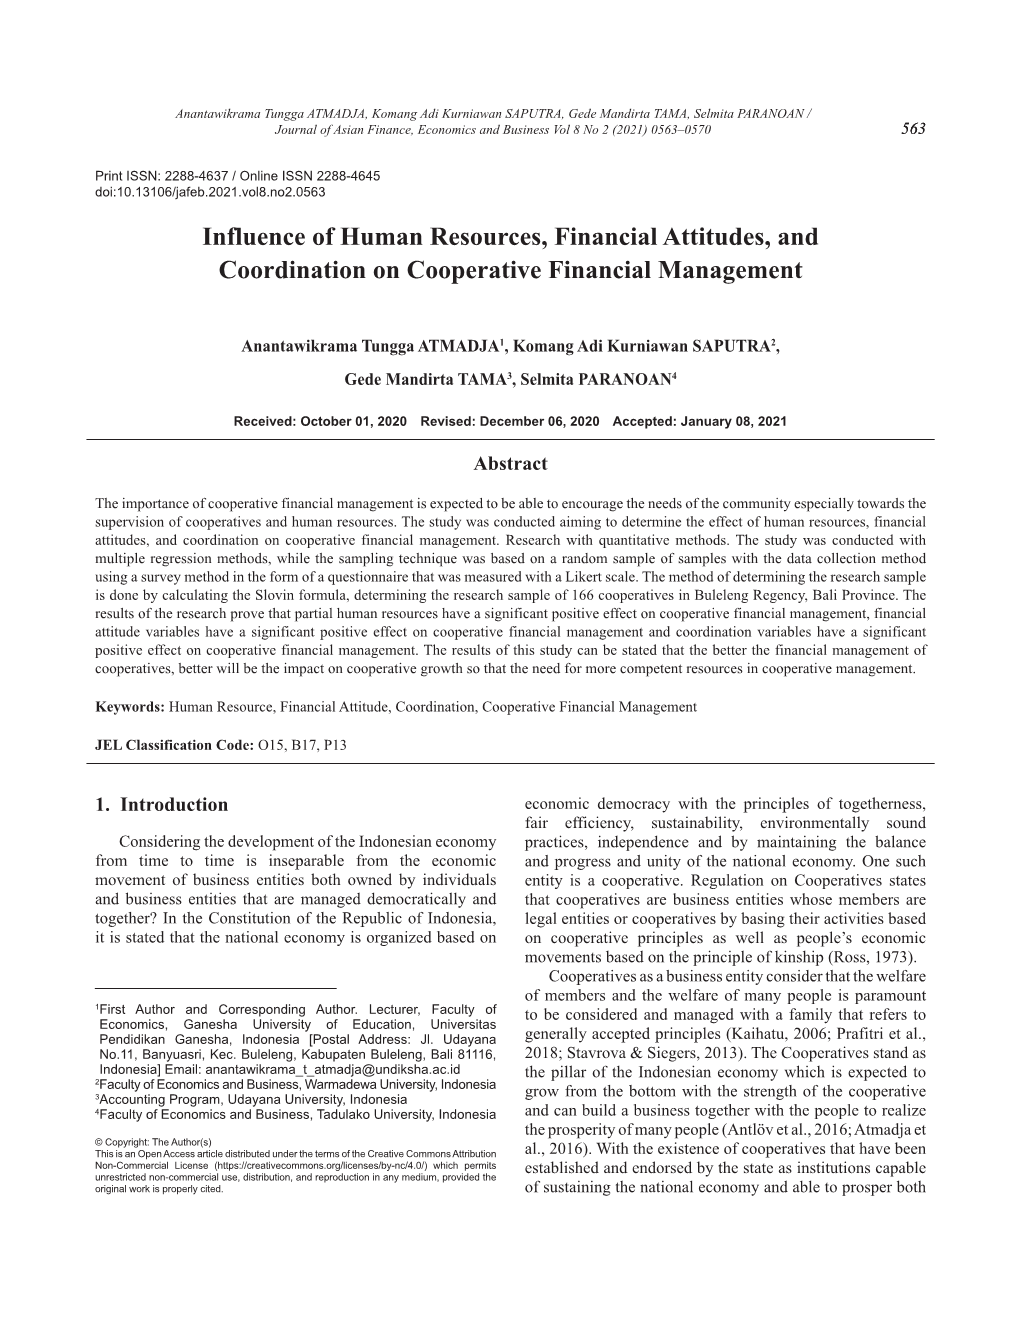 Influence of Human Resources, Financial Attitudes, and Coordination on Cooperative Financial Management